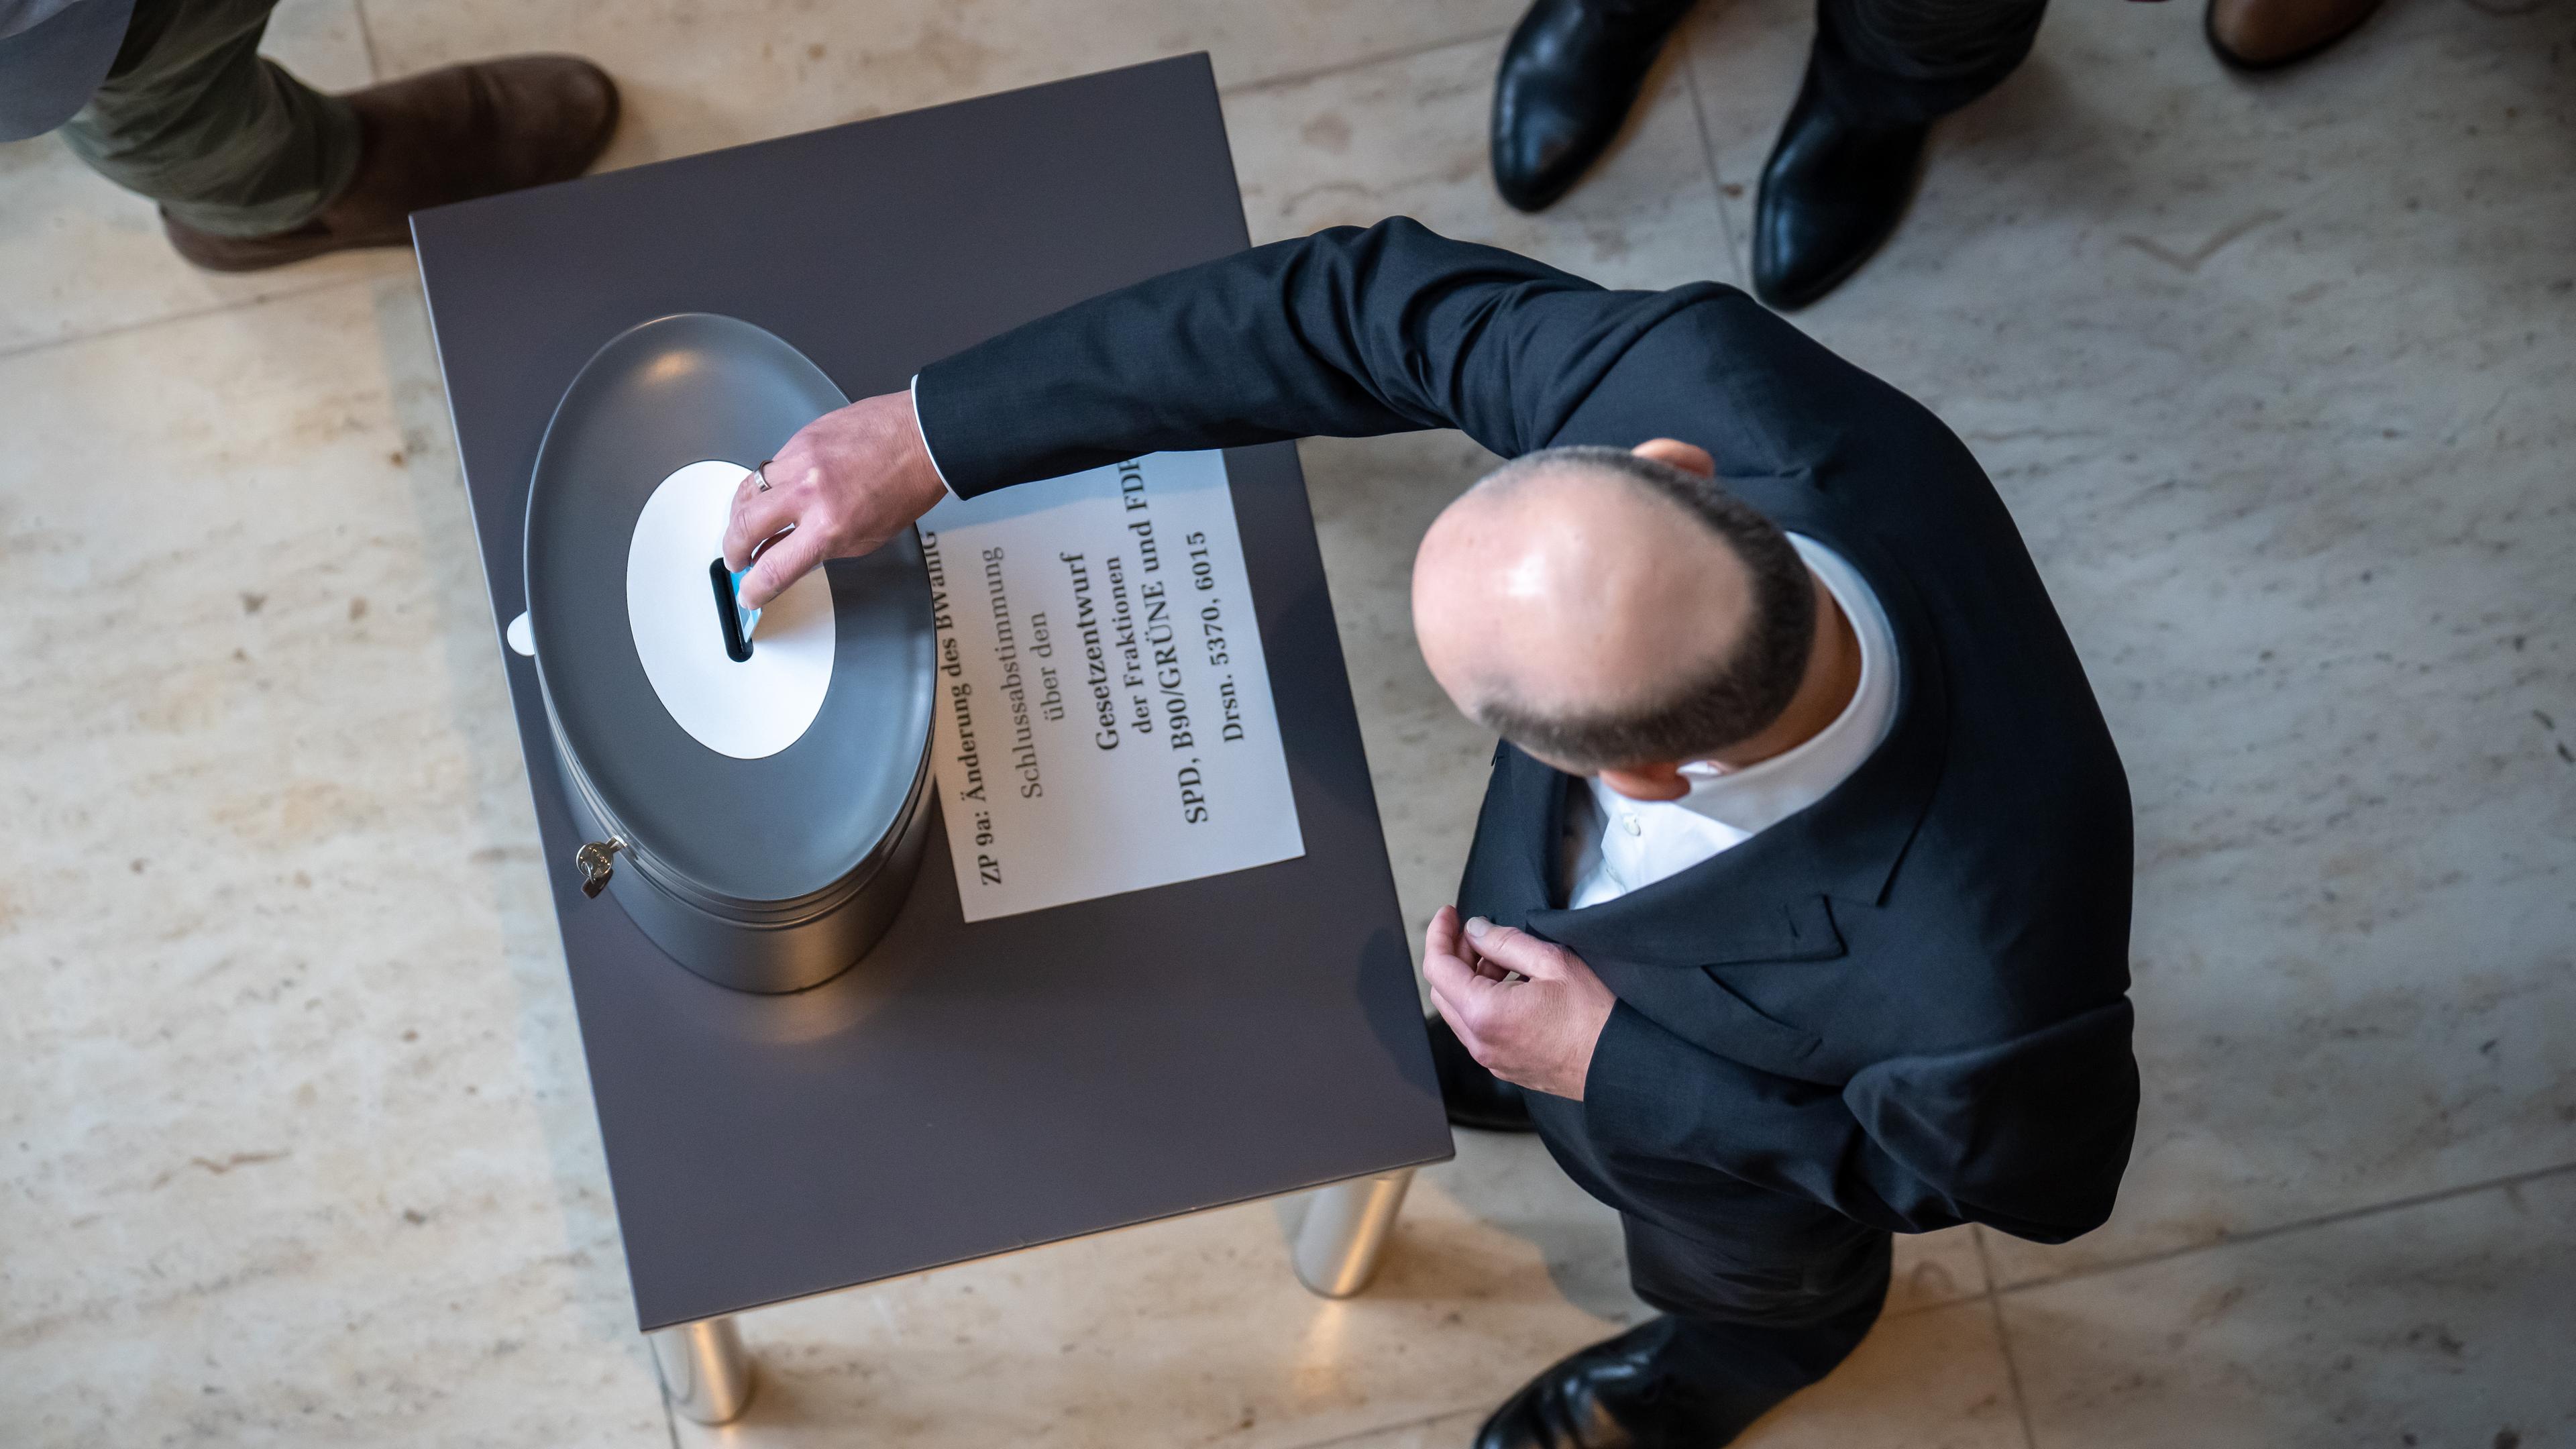 Chancellor Olaf Scholz (SPD) threw his voting card during the roll call in the Bundestag